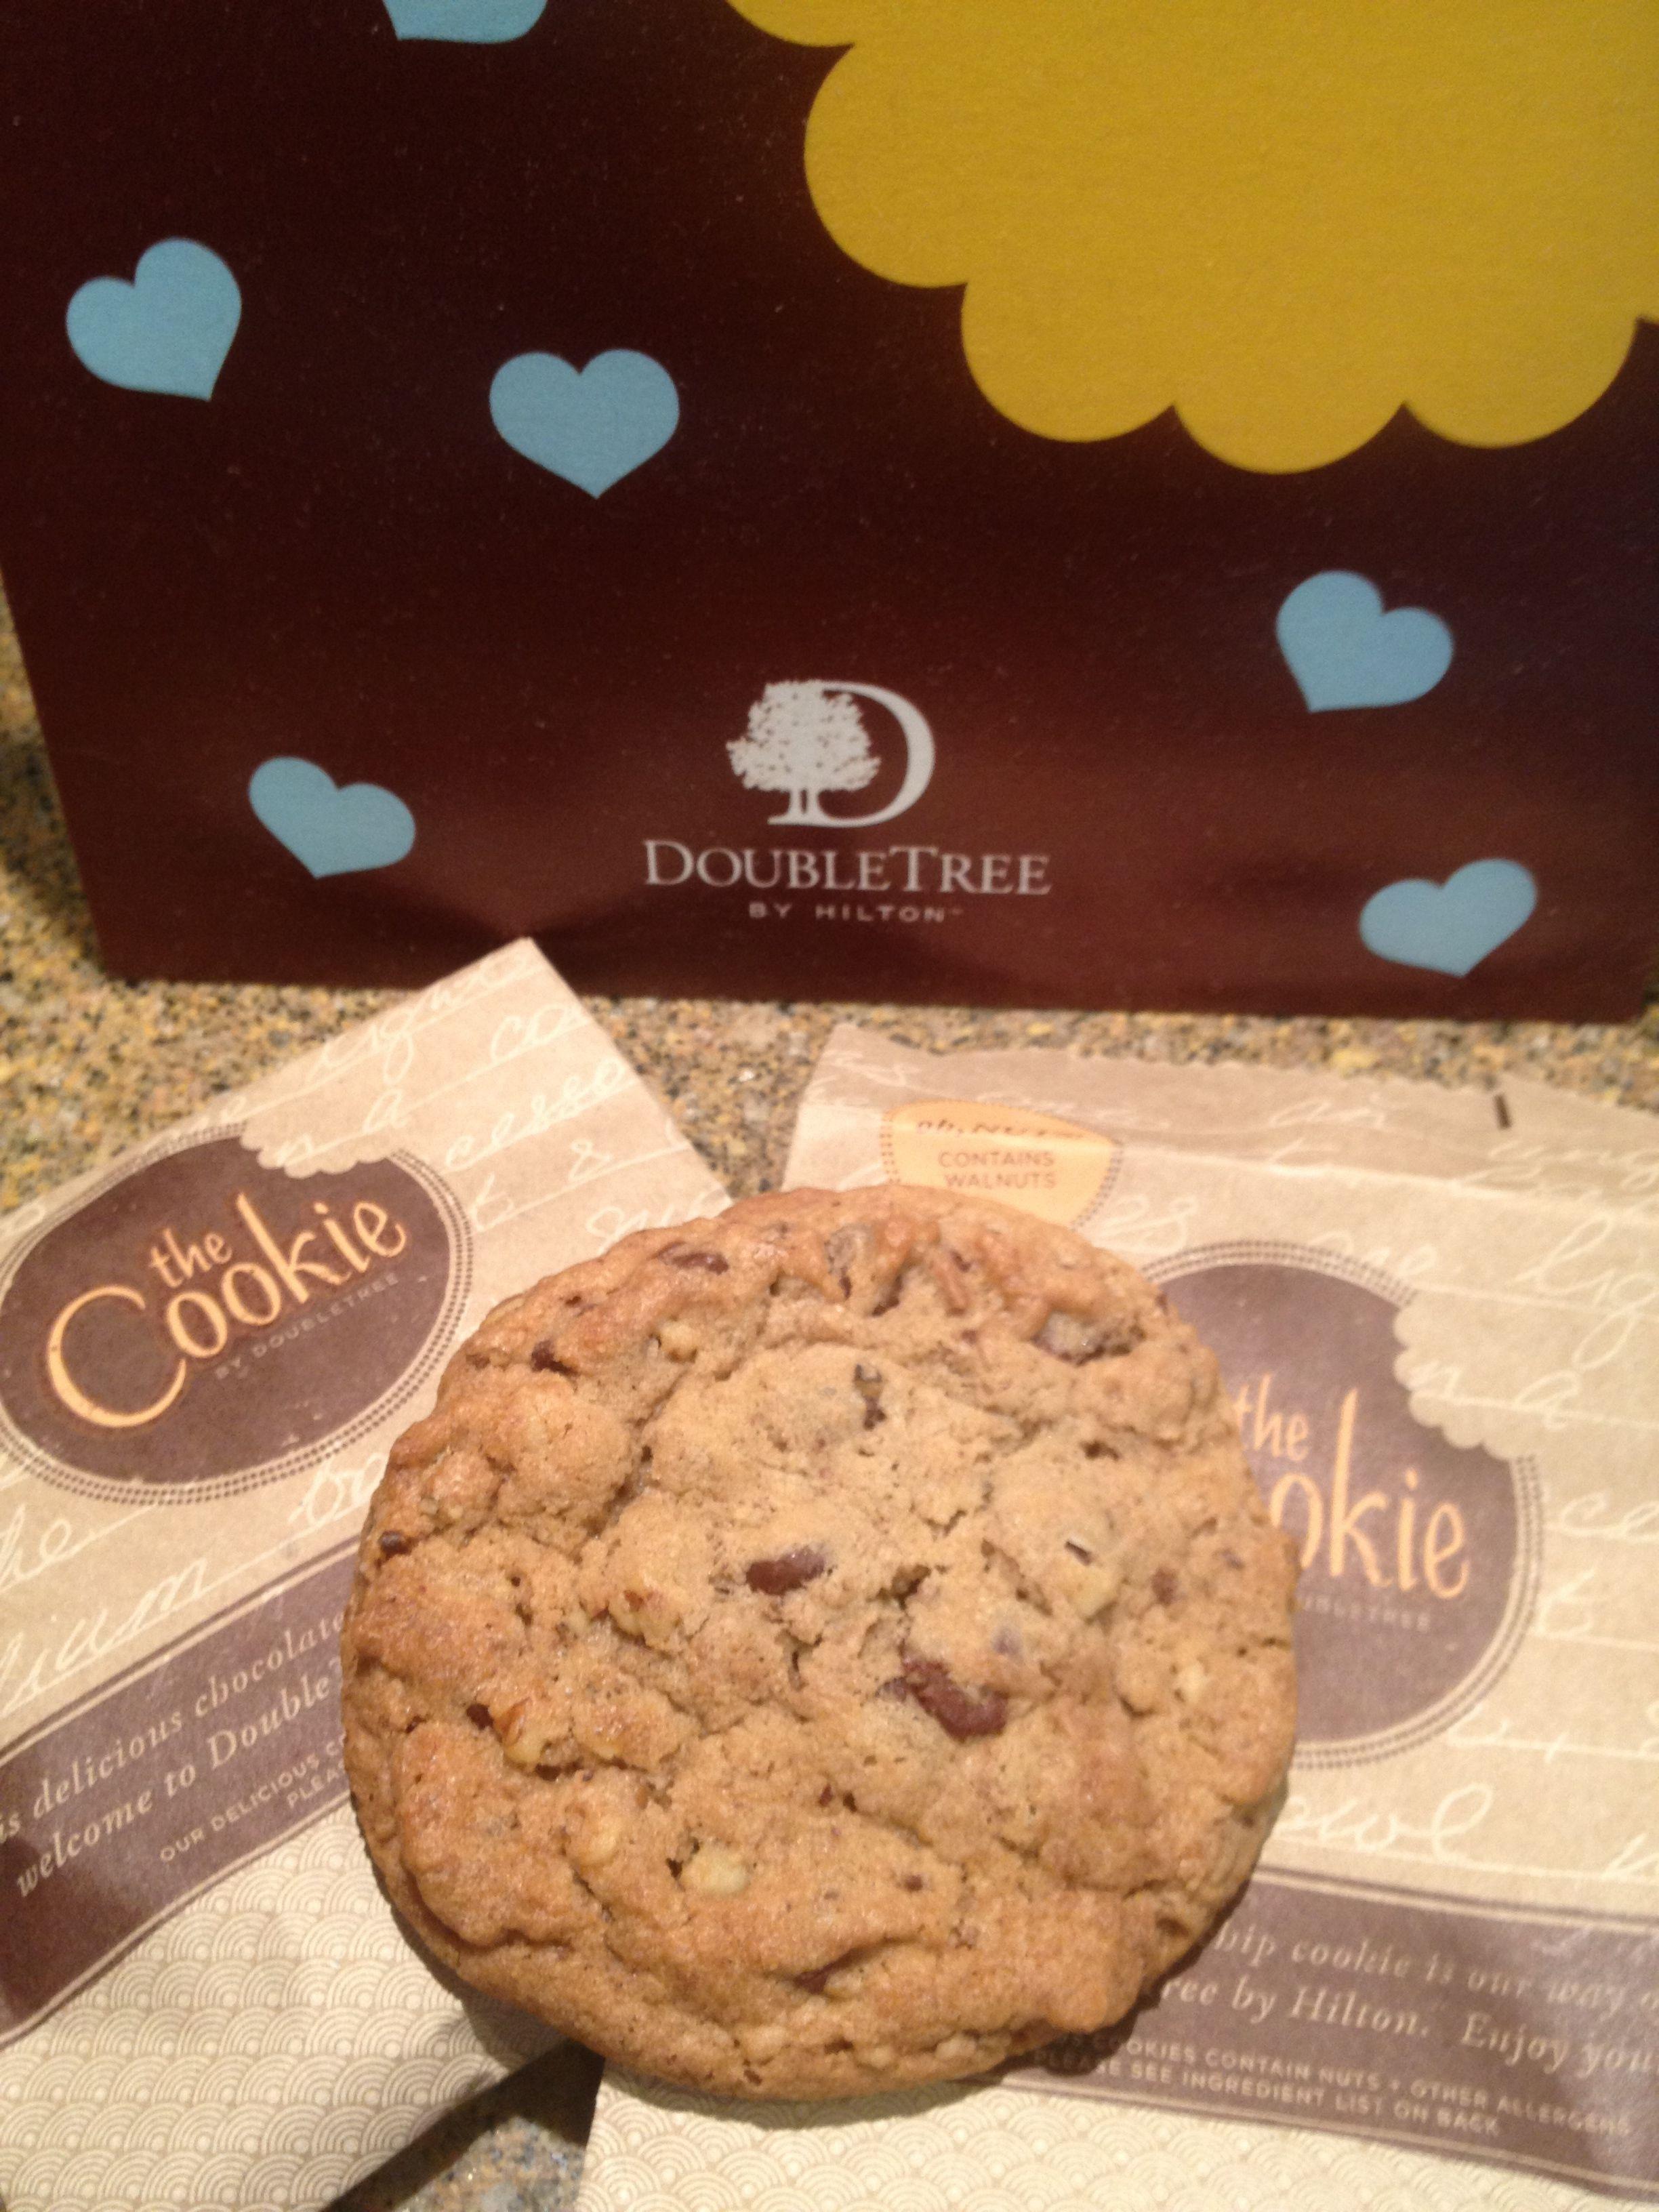 DoubleTree Cookie Logo - The Secret To Getting Free DoubleTree Cookies - Points Miles & Martinis